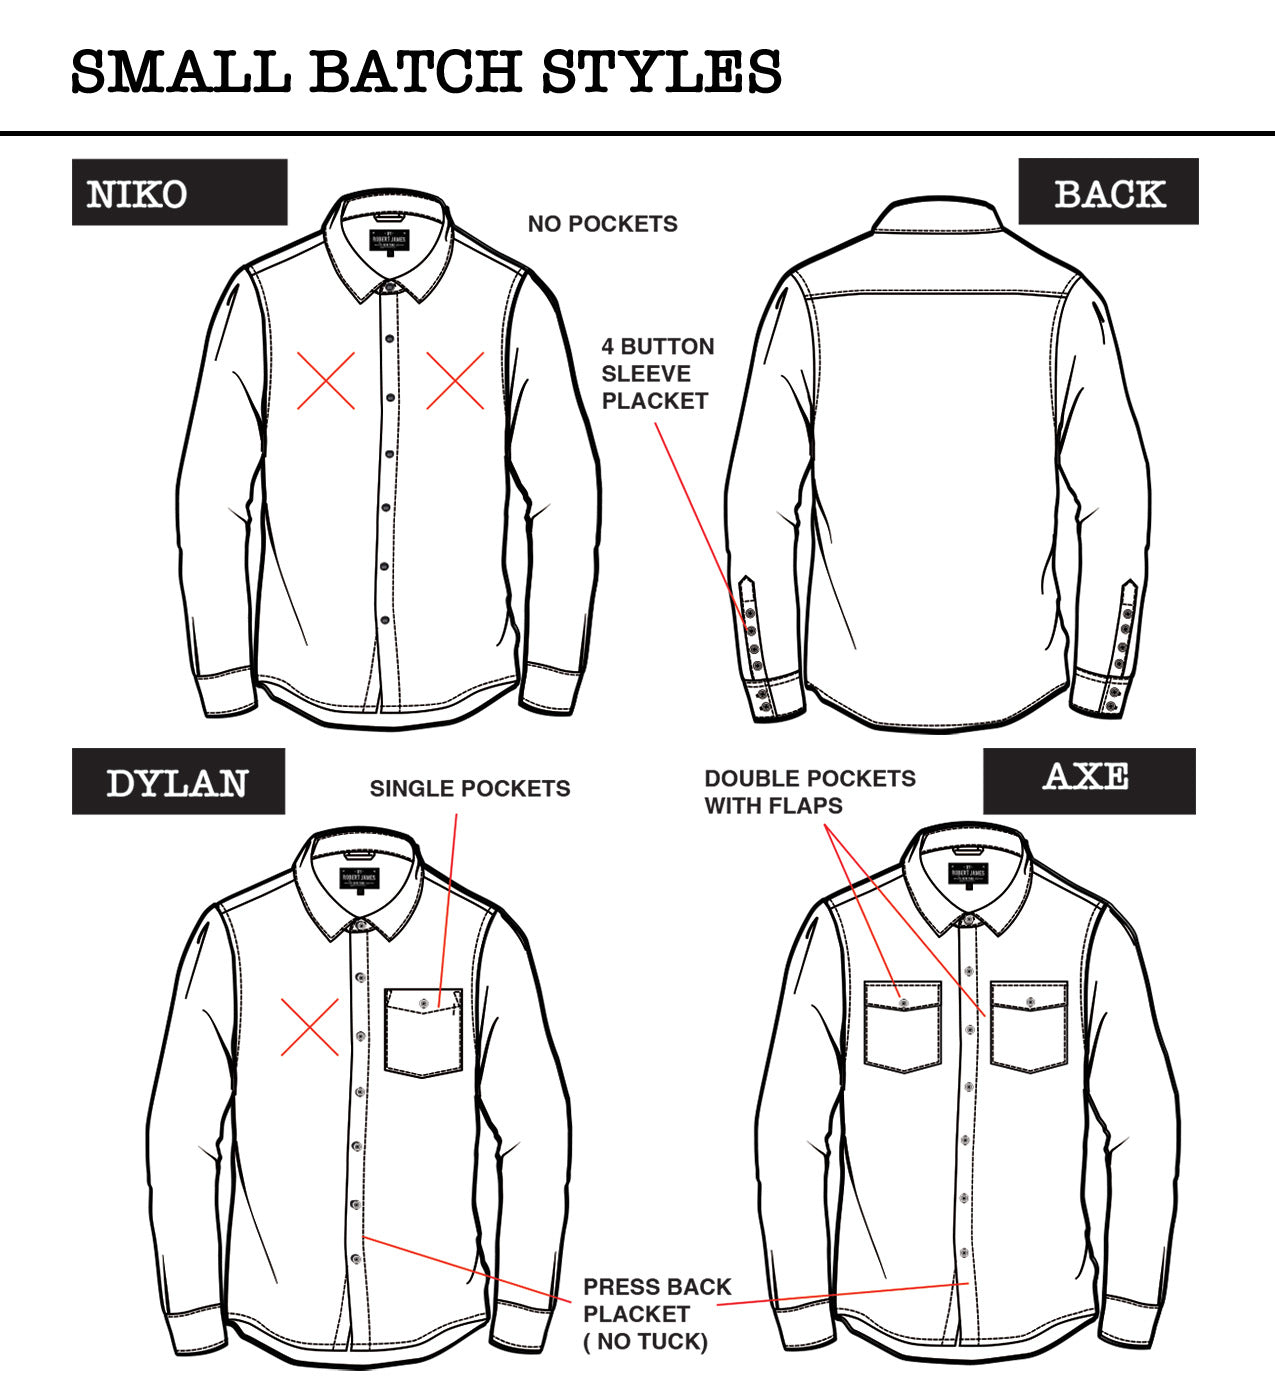 SMALL BATCH STYLES- "BAD ASS  PRINTS"